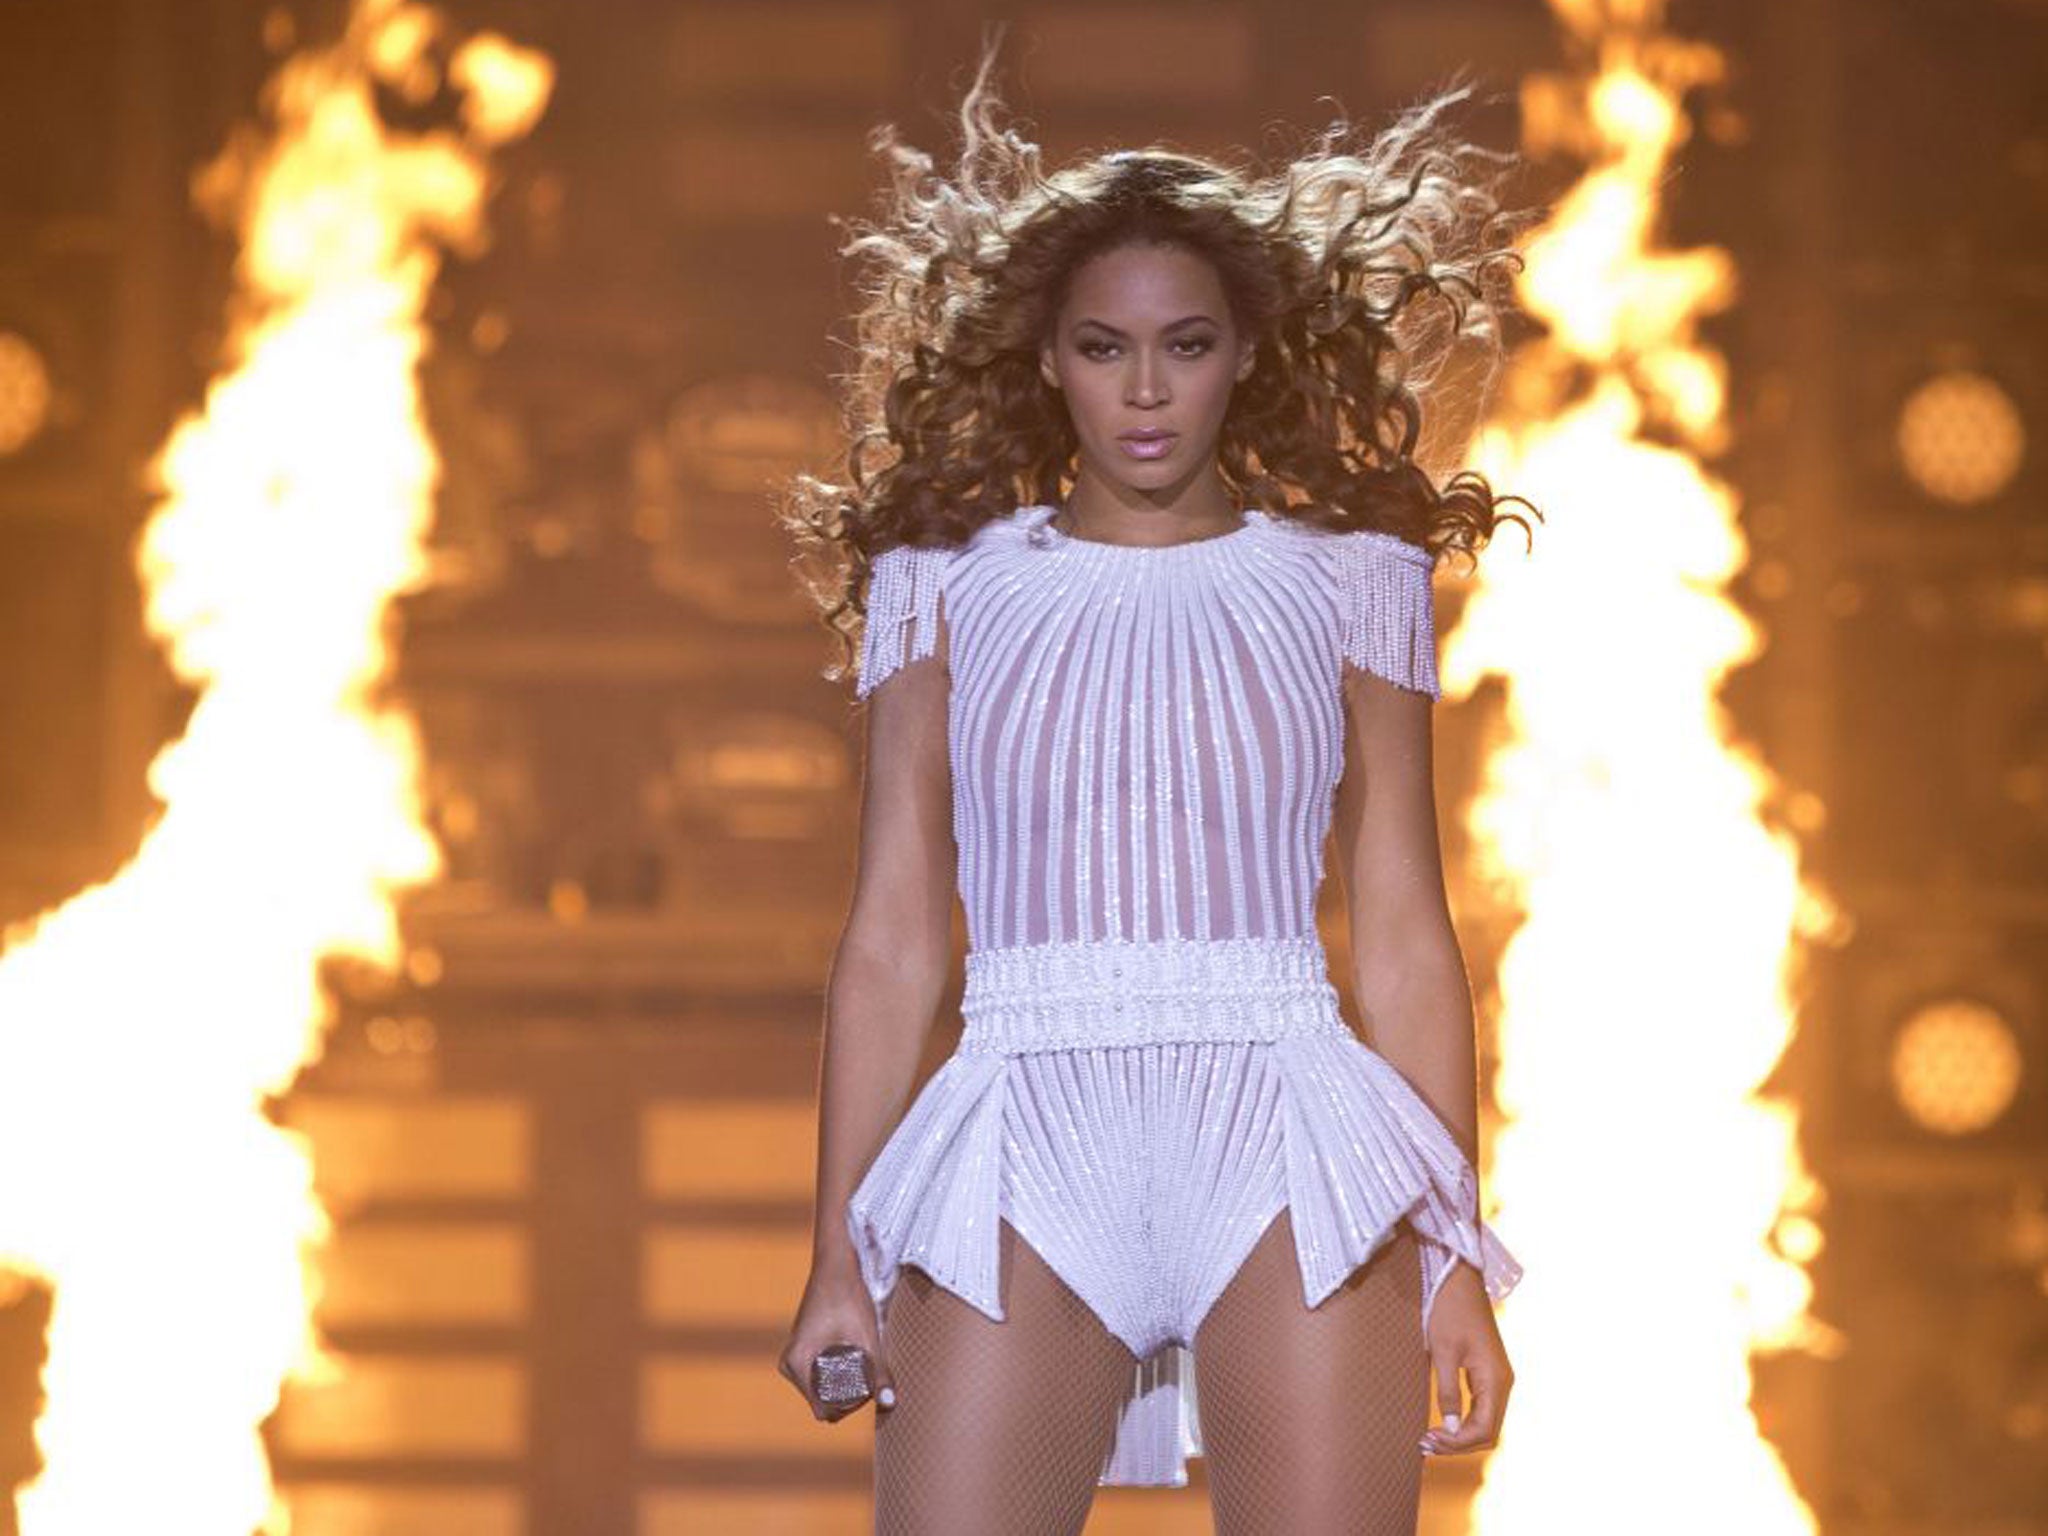 Flames, check. Wind machine, check. Beyoncé pulls out all of the theatrical stops on this tour